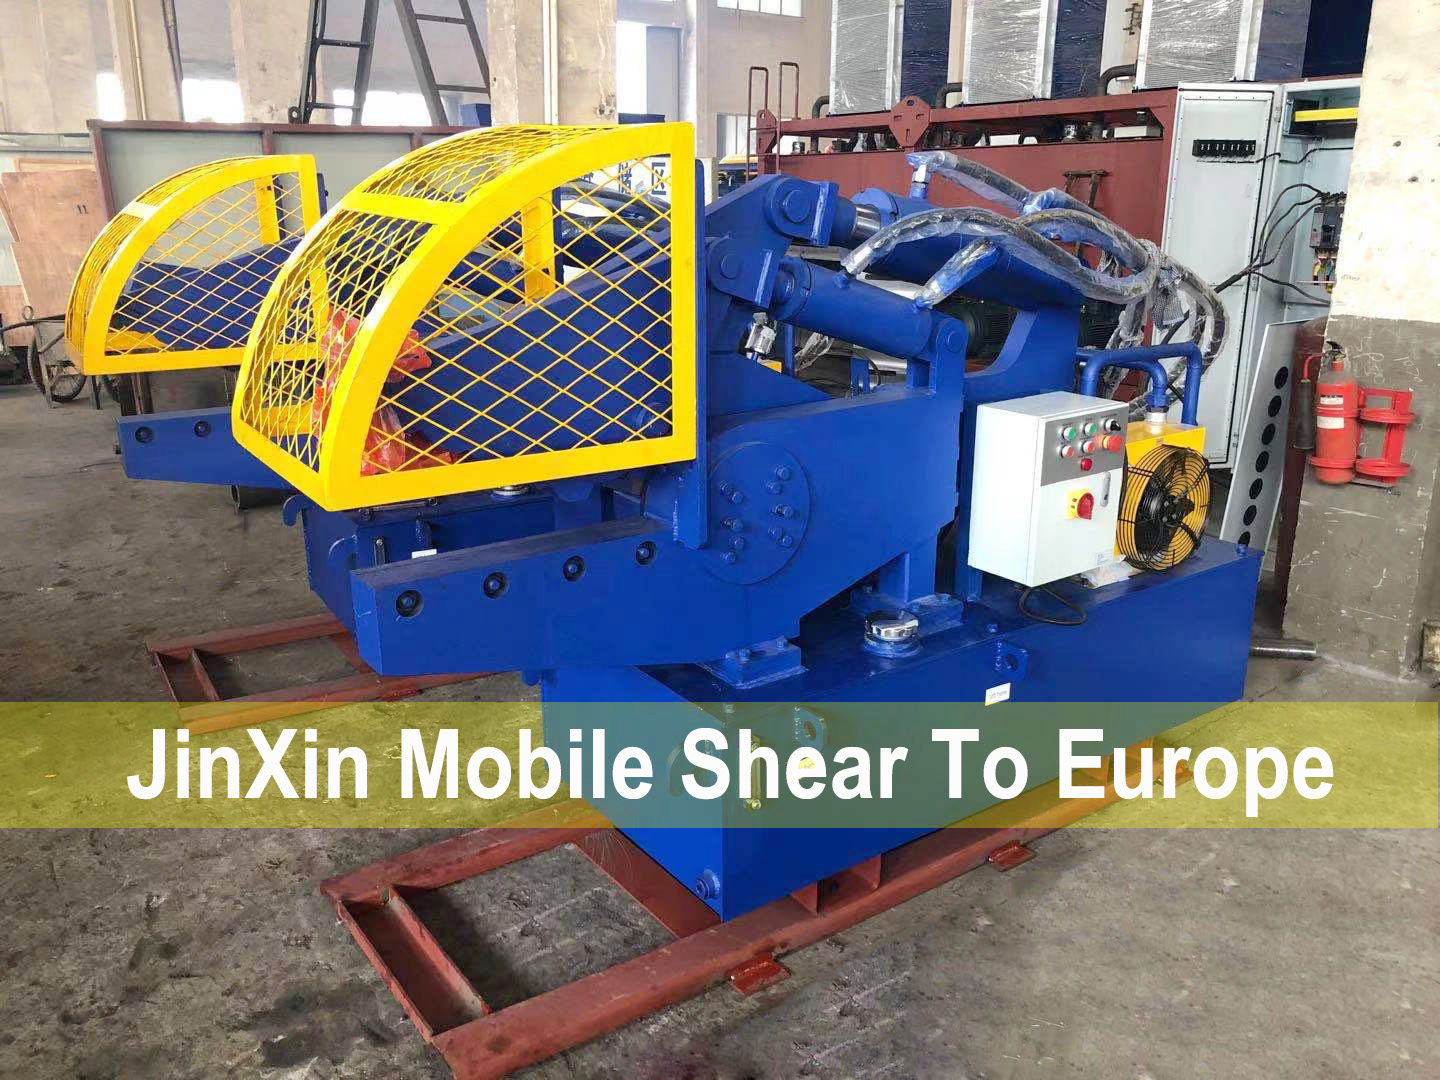 JinXin Mobile Metal Shears Are Exported To Europe